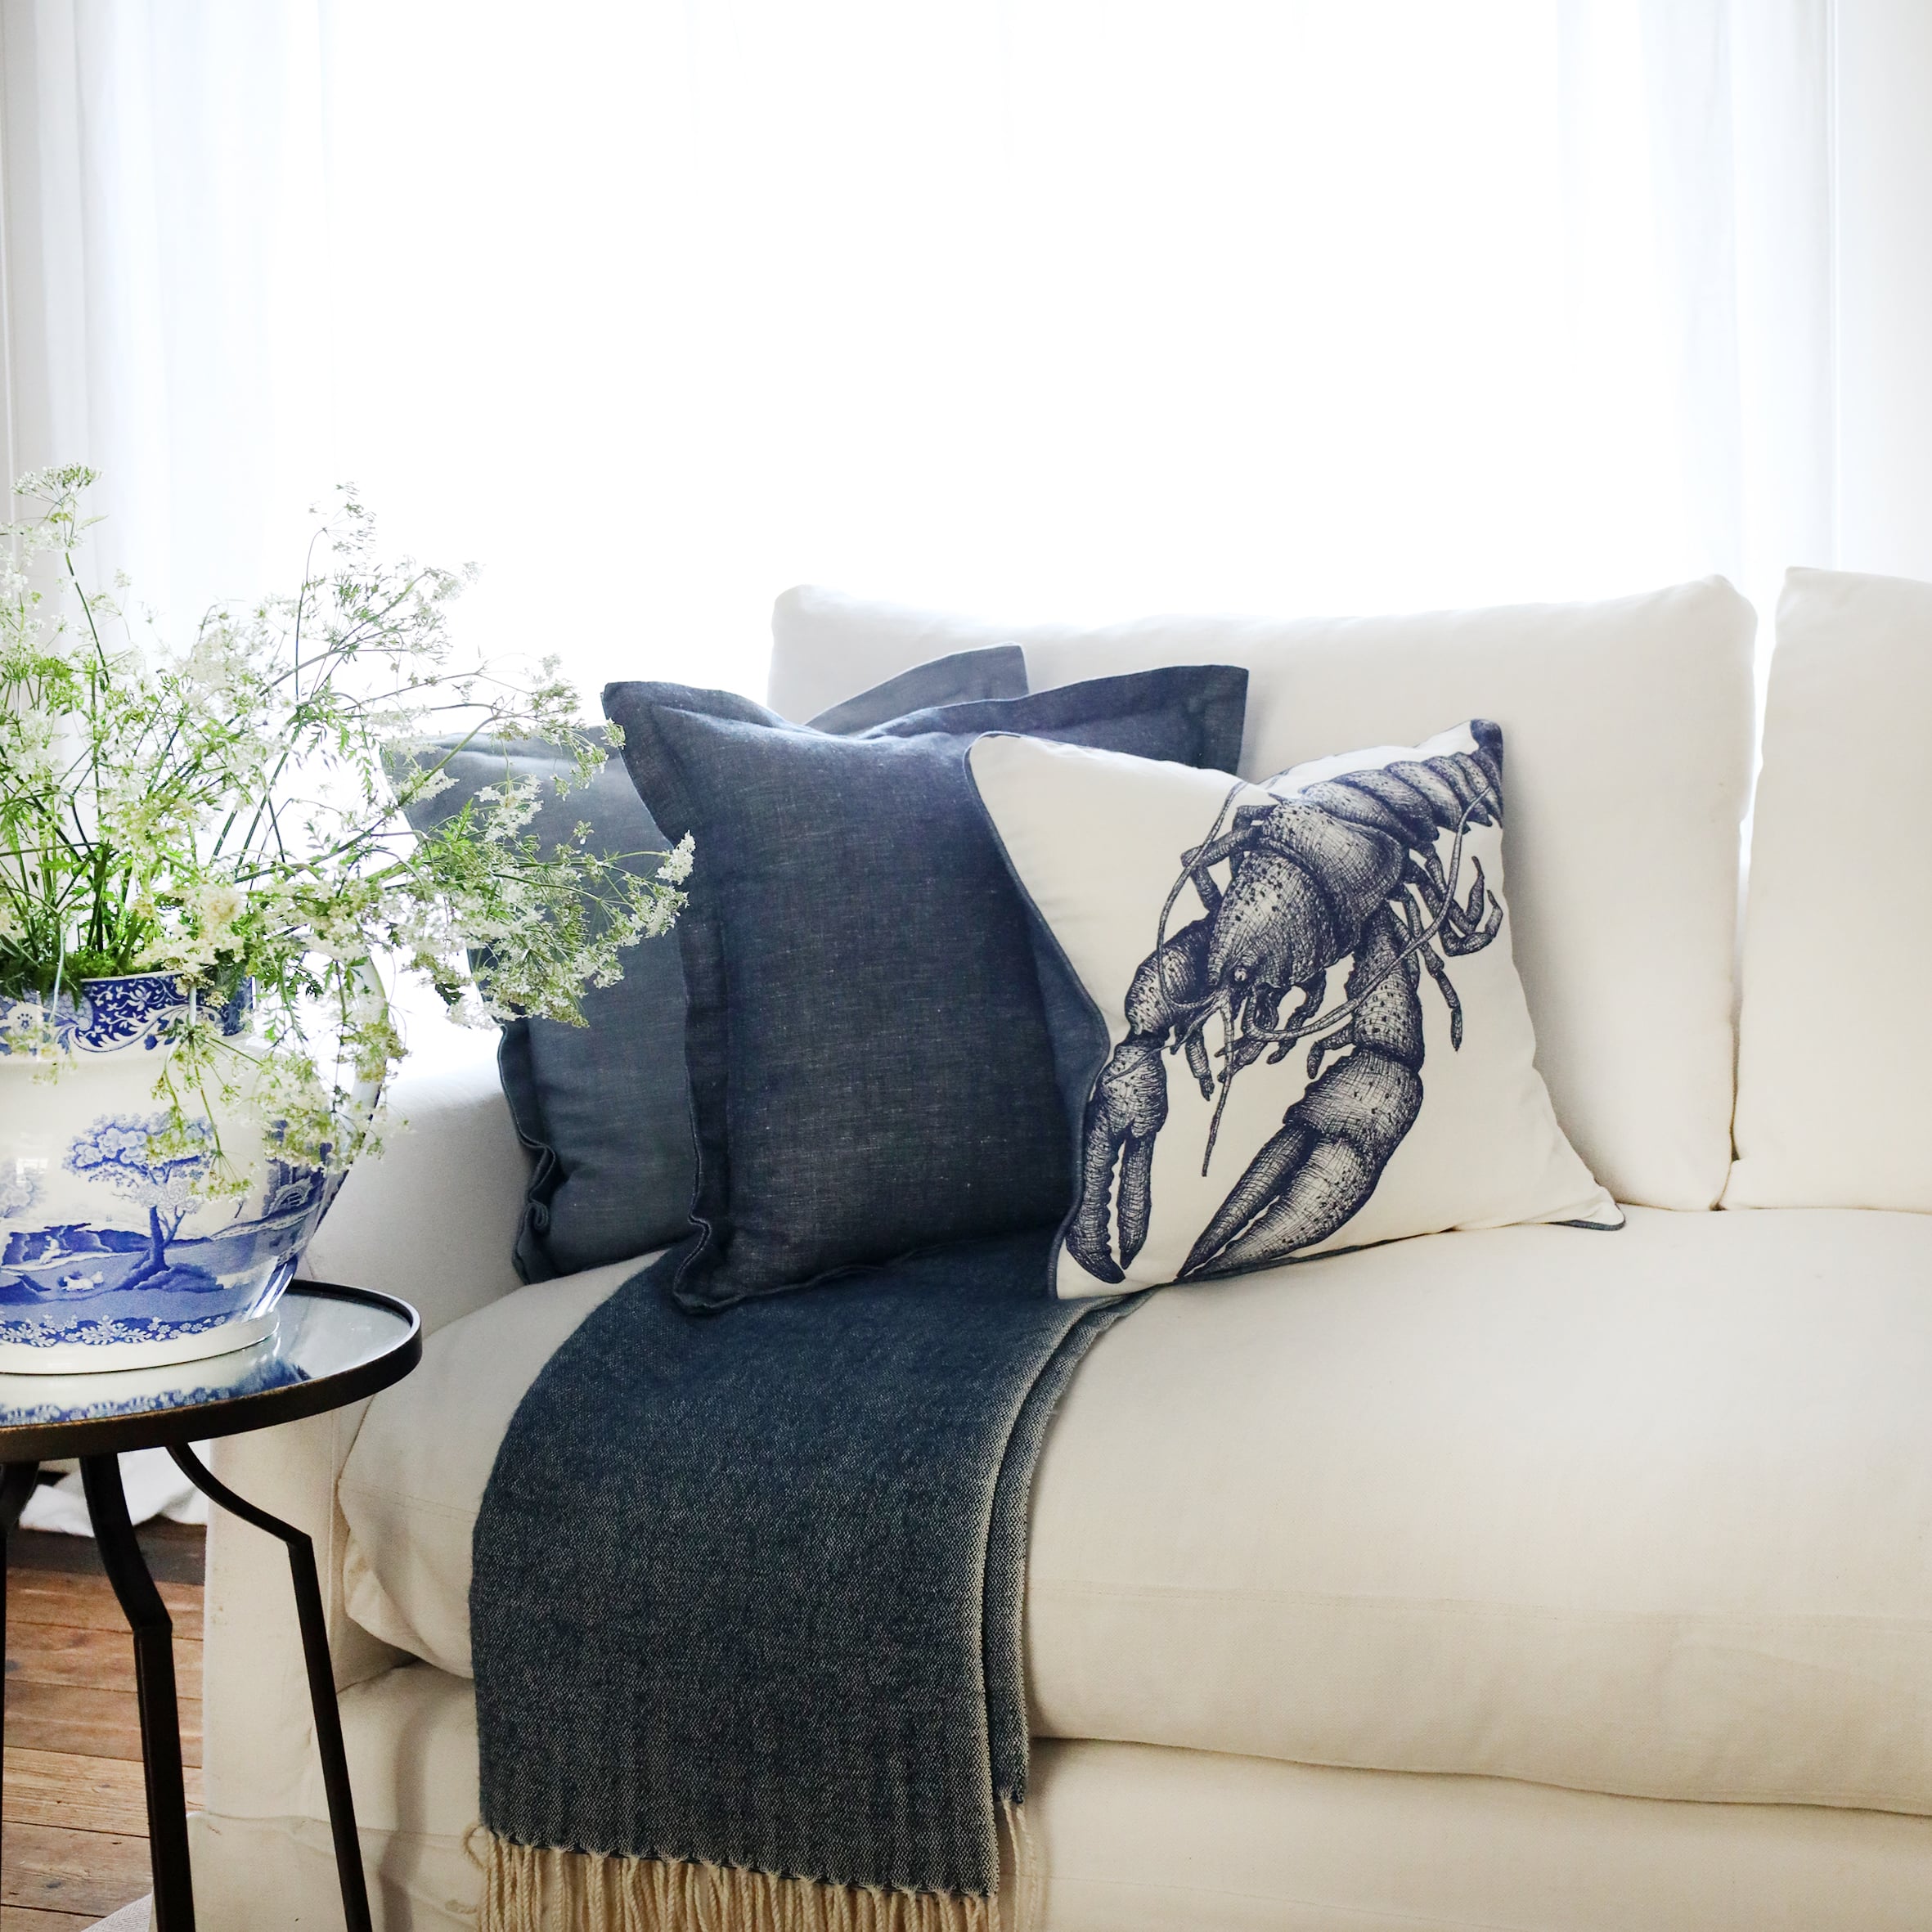 2 cushions in tones of blue with an illustrated lobster cushion at the front lined up on a white sofa with the sun streaming in from behind and a large willow pattern jug full of cow parsley